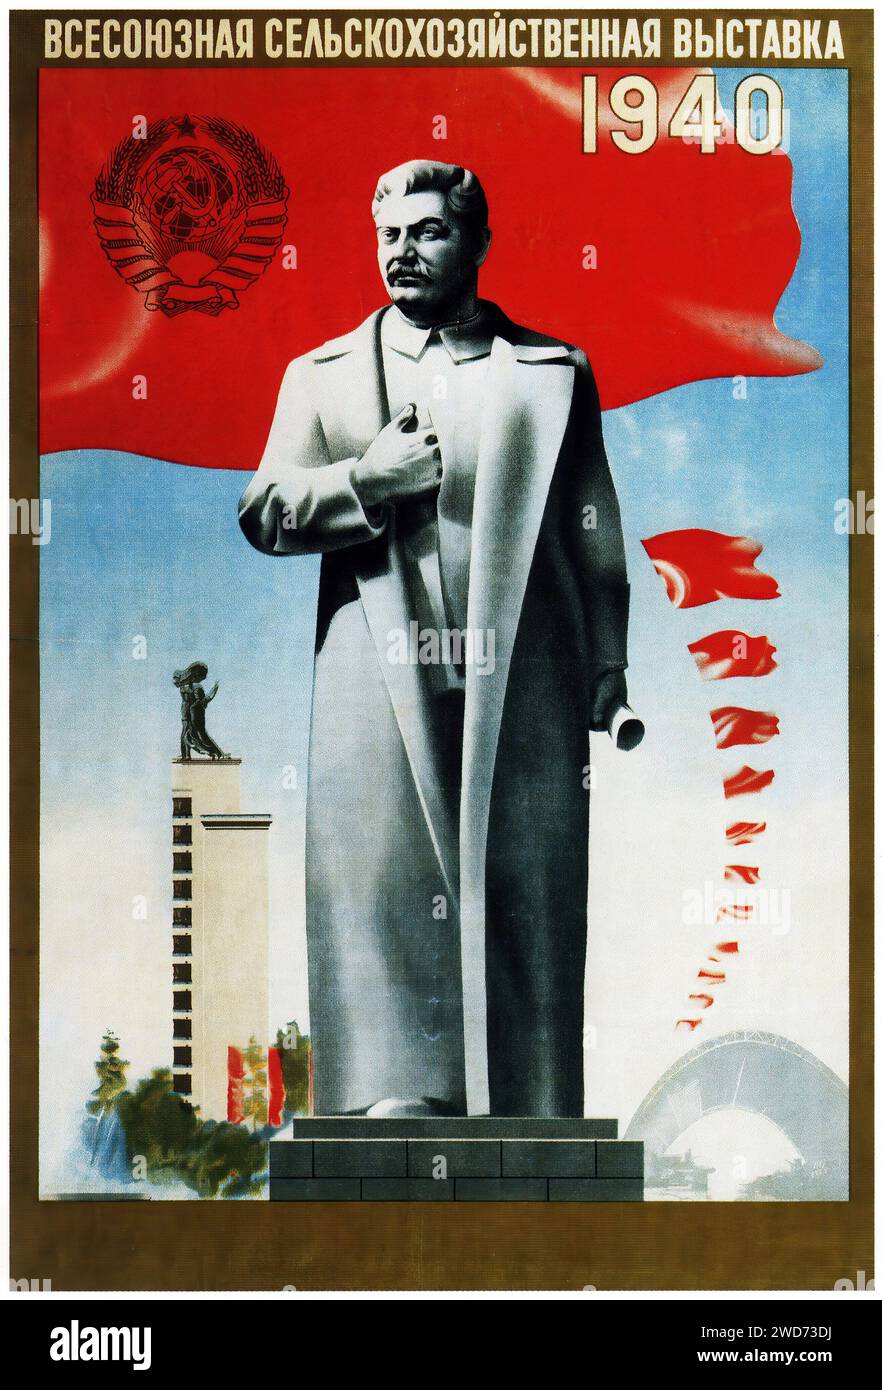 Viktor Klimashin. All-Union Agricultural Exhibition. 1940 - Vintage Soviet Advertising and propaganda - 1940' 'All-Union Agricultural Exhibition 1940' This is a promotional poster for the 1940 All-Union Agricultural Exhibition, featuring a sculpture-like portrayal of Joseph Stalin against a Soviet flag, with an agricultural and industrial exhibition in the background. It is styled in social realist art typical of the Soviet era, with bold colors and heroic imagery. Stock Photo